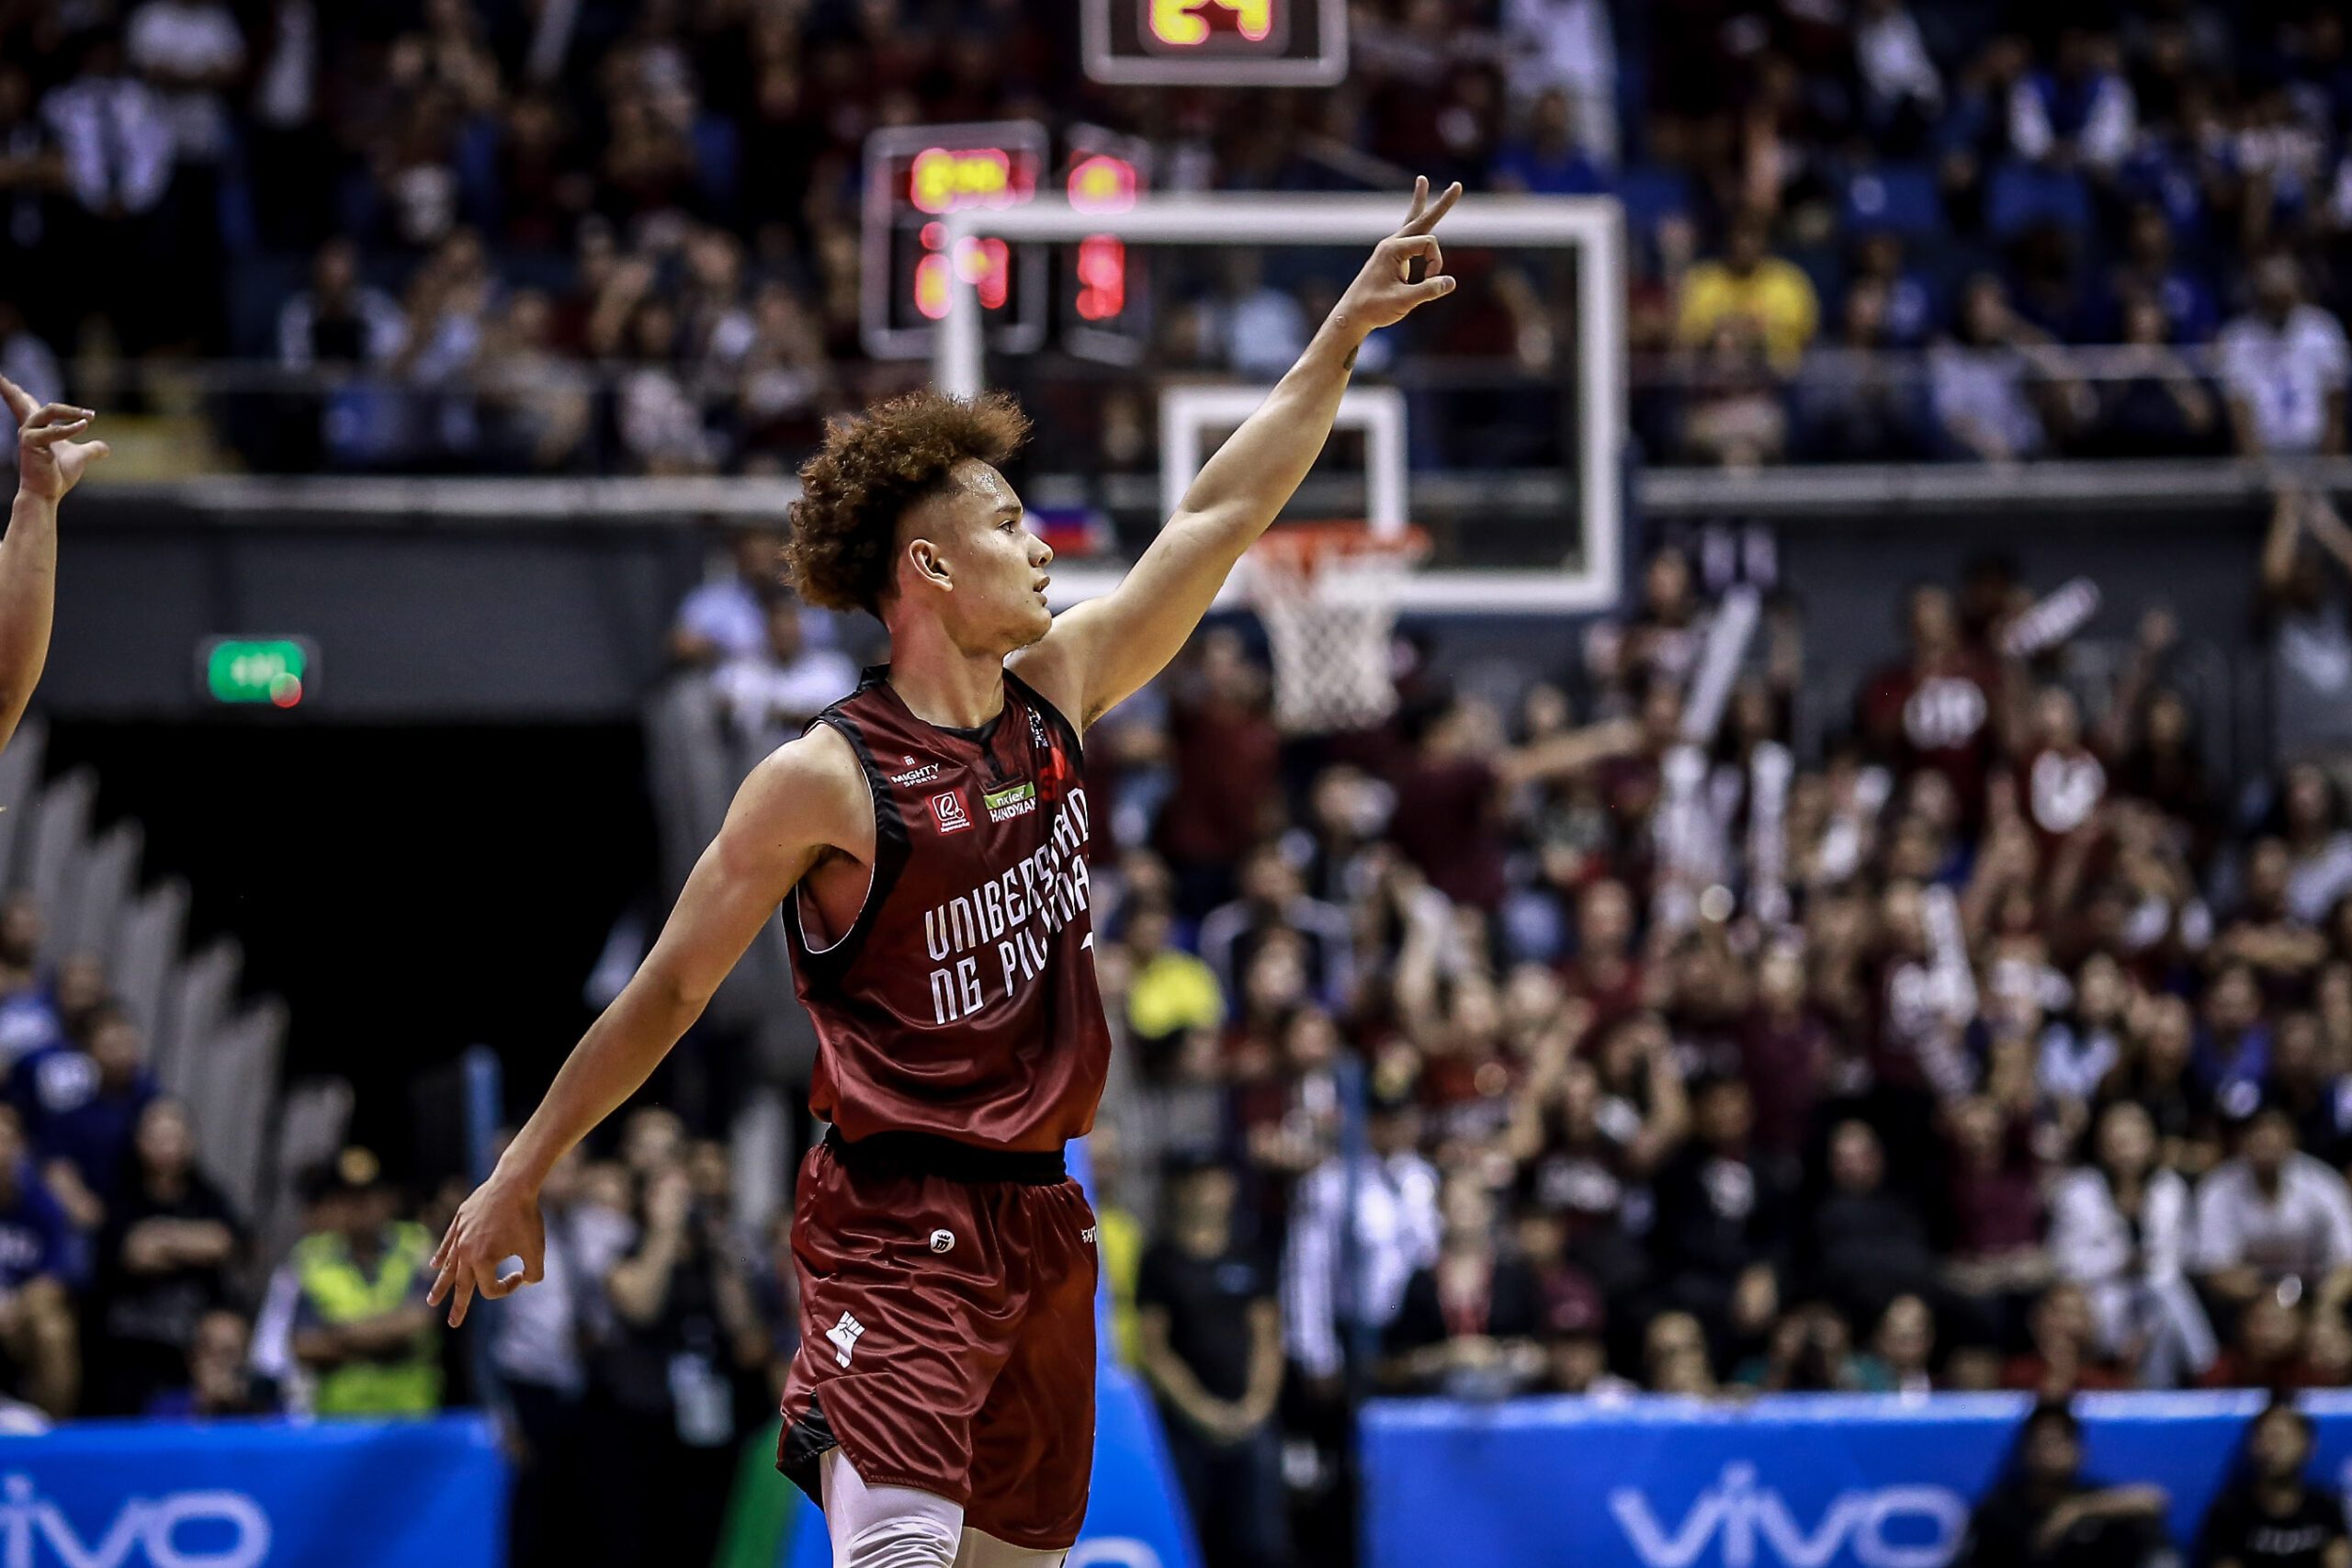 WATCH: No less than a championship for loaded UP Fighting Maroons